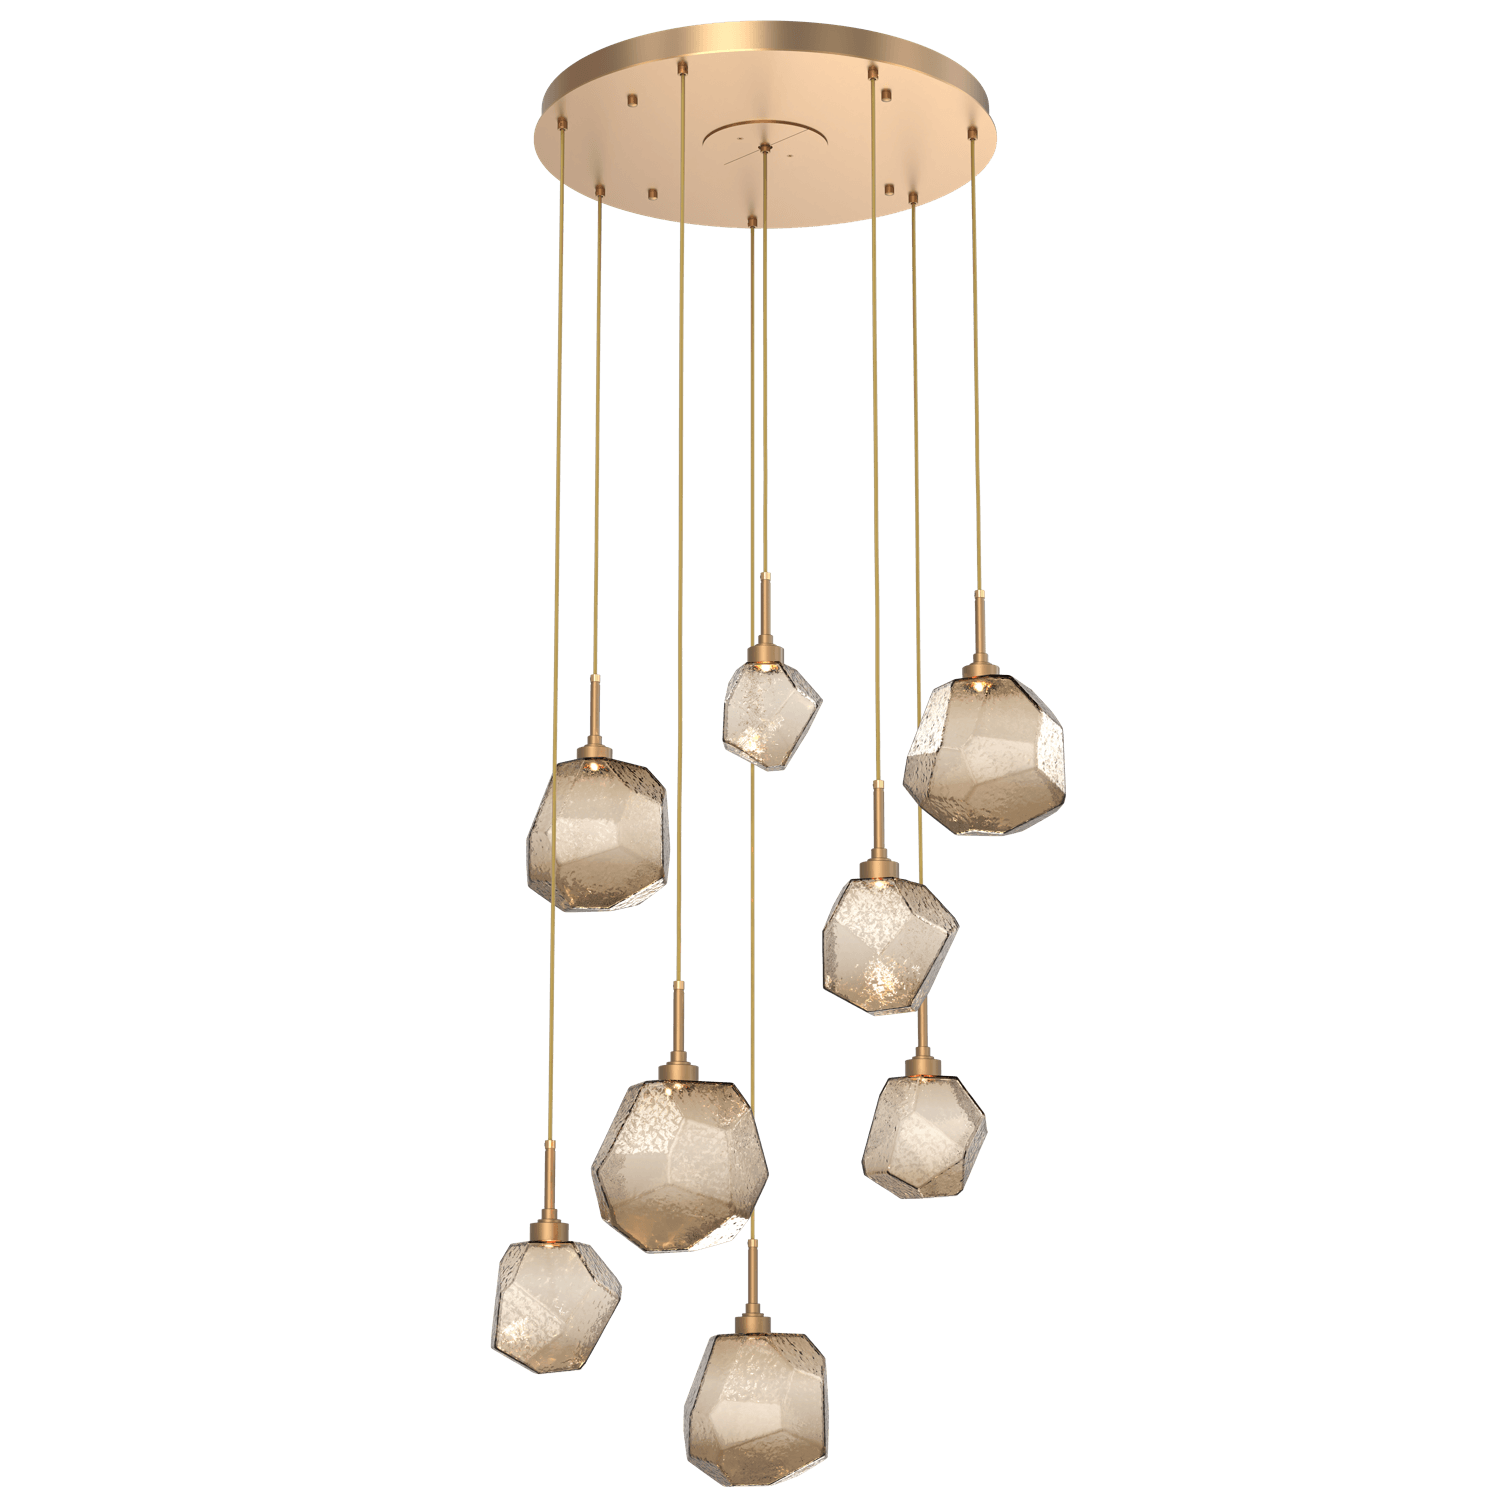 CHB0039-08-NB-B-Hammerton-Studio-Gem-8-light-round-pendant-chandelier-with-novel-brass-finish-and-bronze-blown-glass-shades-and-LED-lamping